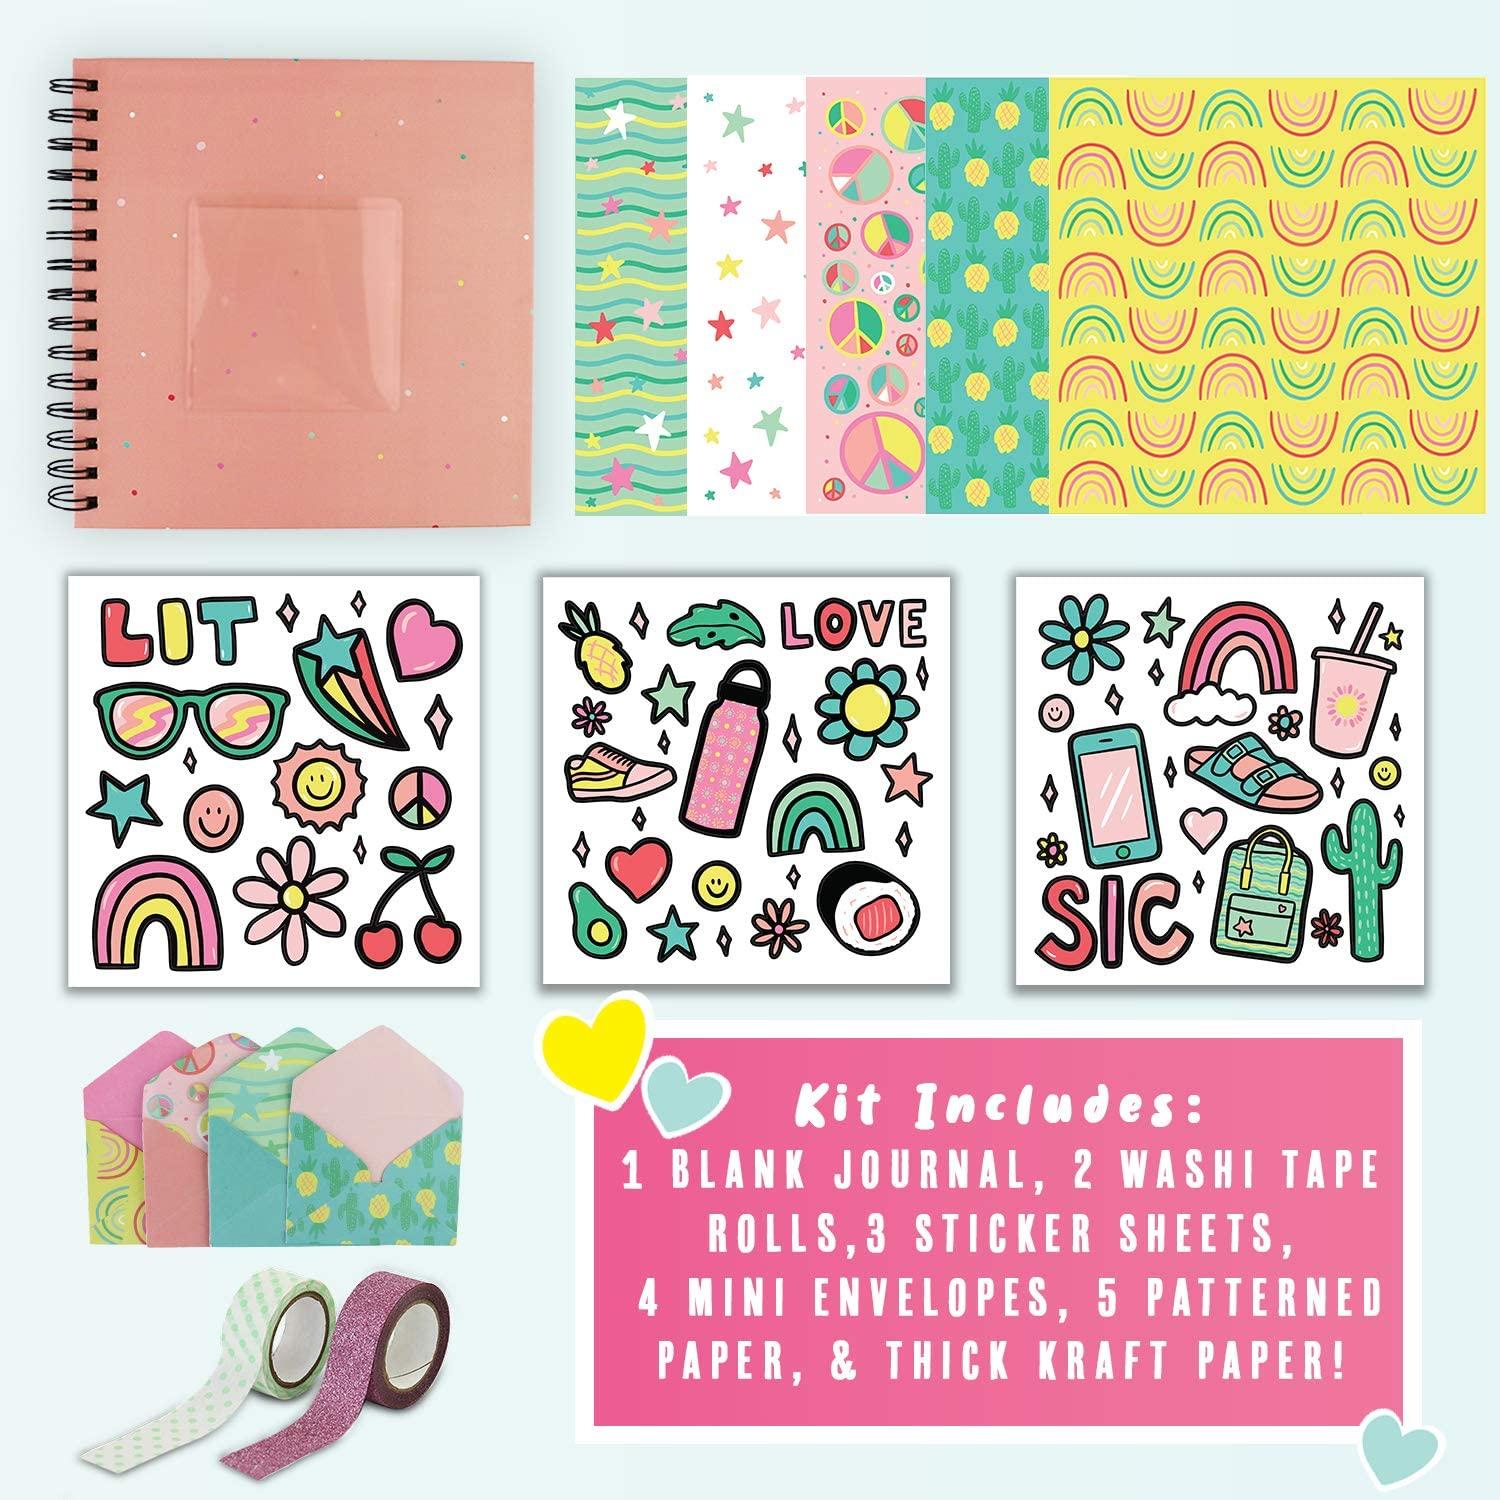 DOODLE HOG Design Your Own Pink Scrapbook, Kids Scrapbook Kit, Gifts for 10  Year Old Girl, Personalize & Decorate Your DIY Scrapbook with Washi Tape,  Sticker Sheets, 40-Page Thick Paper, Hardcover